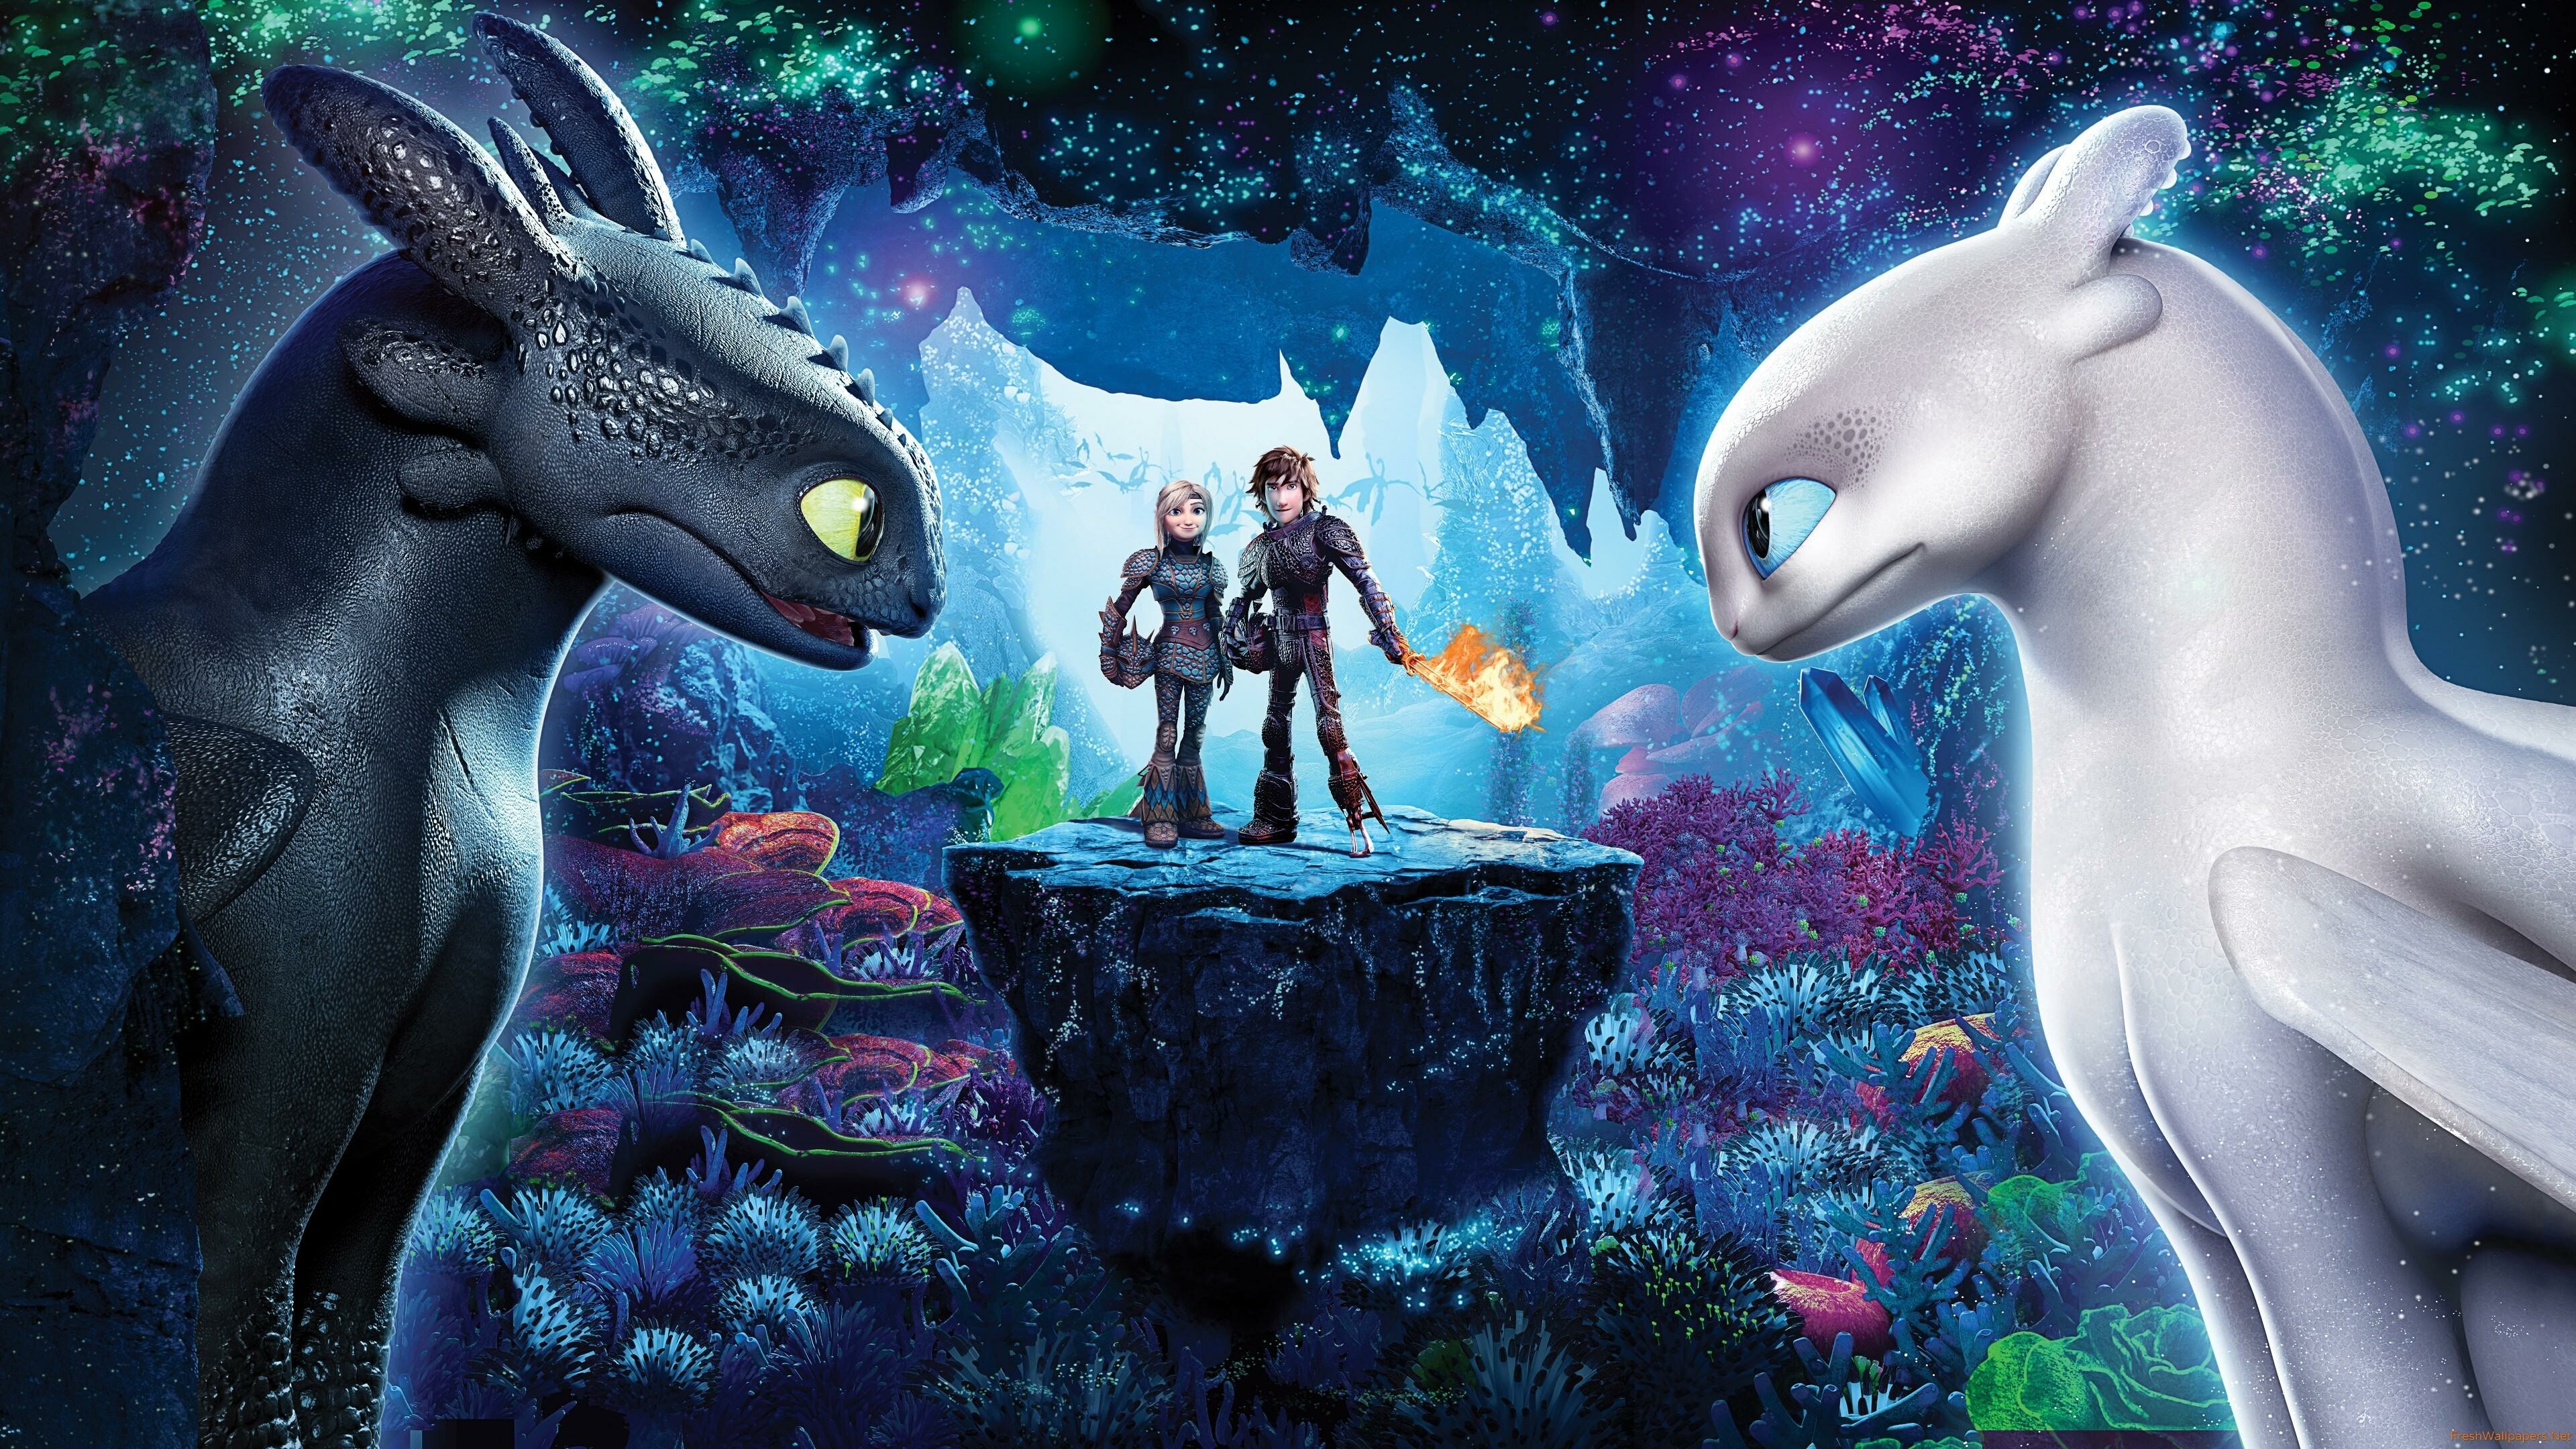 Hiccup and Light Fury, How to Train Your Dragon Wallpaper, 3840x2160 4K Desktop